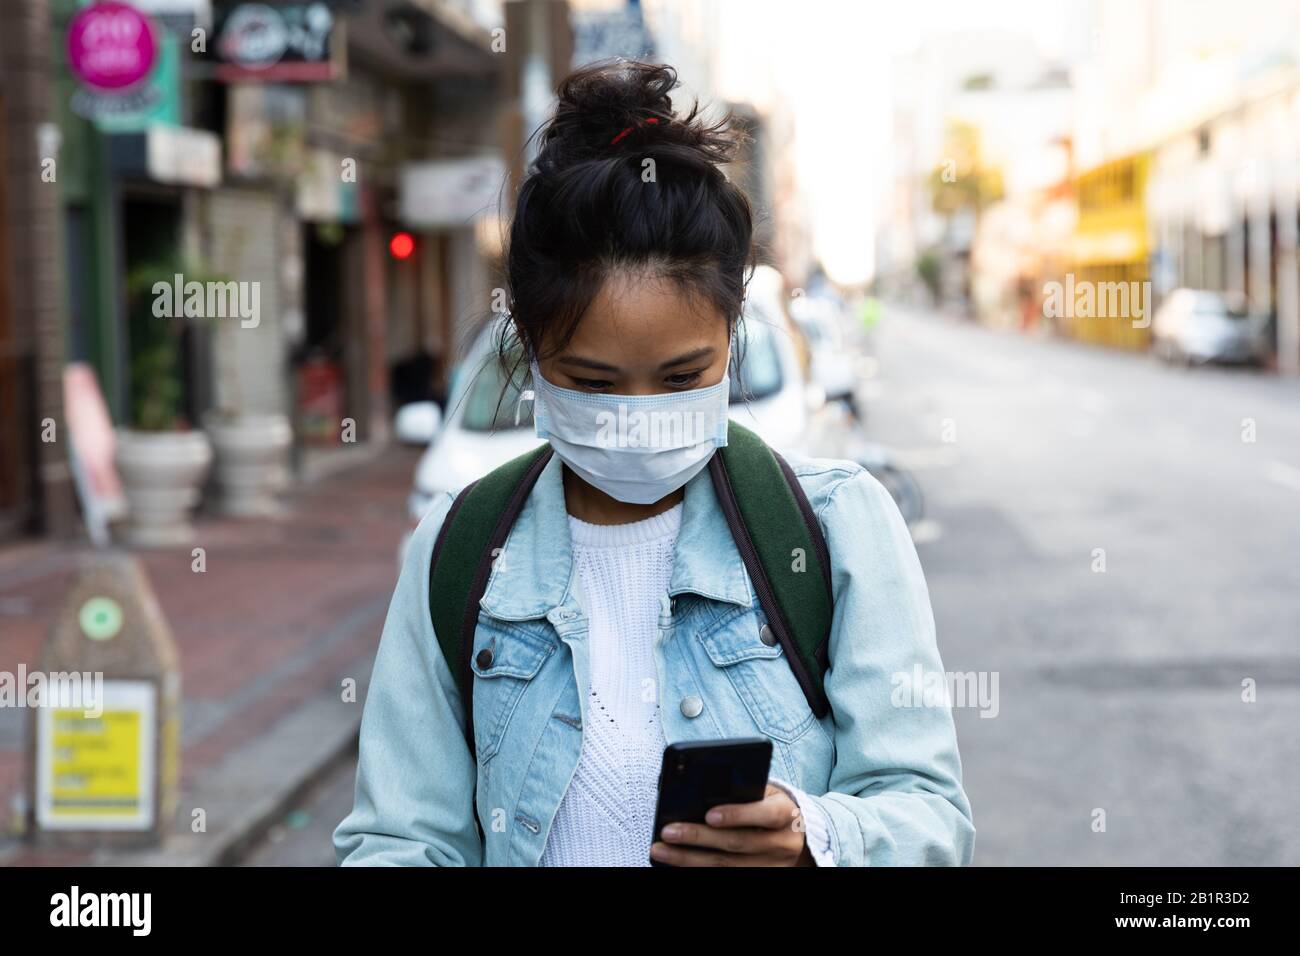 Woman walking in the street and wearing a Corona Virus face mask Stock Photo